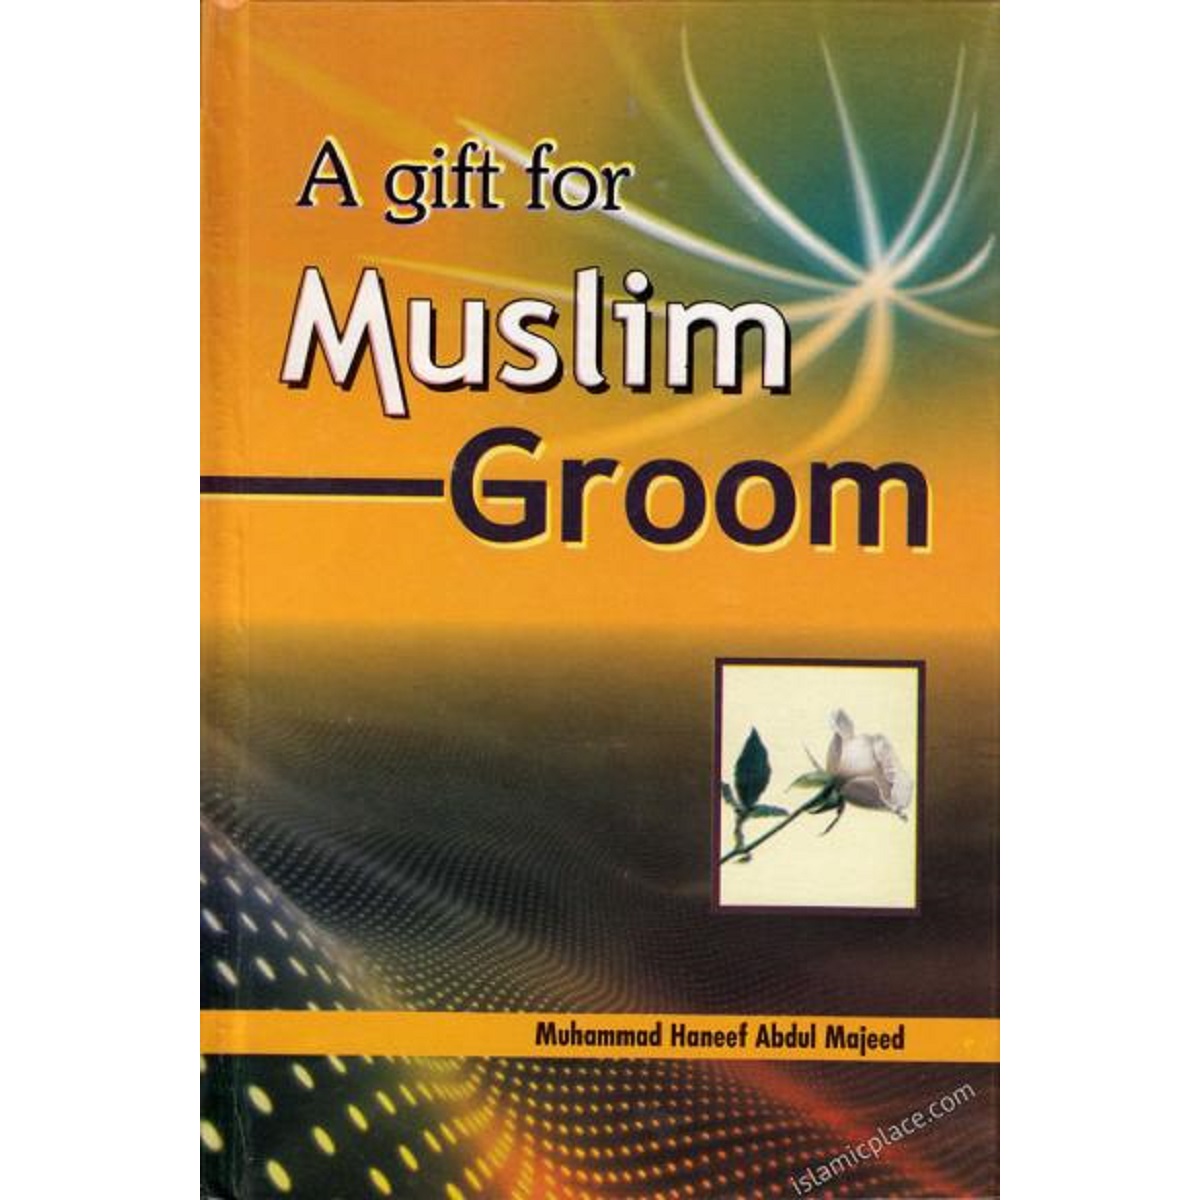 https://tarbiyahbooksplus.com/shop/family-lifewomen/a-gift-for-muslim-groom-a-guide-for-joyous-and-successful-married-life/